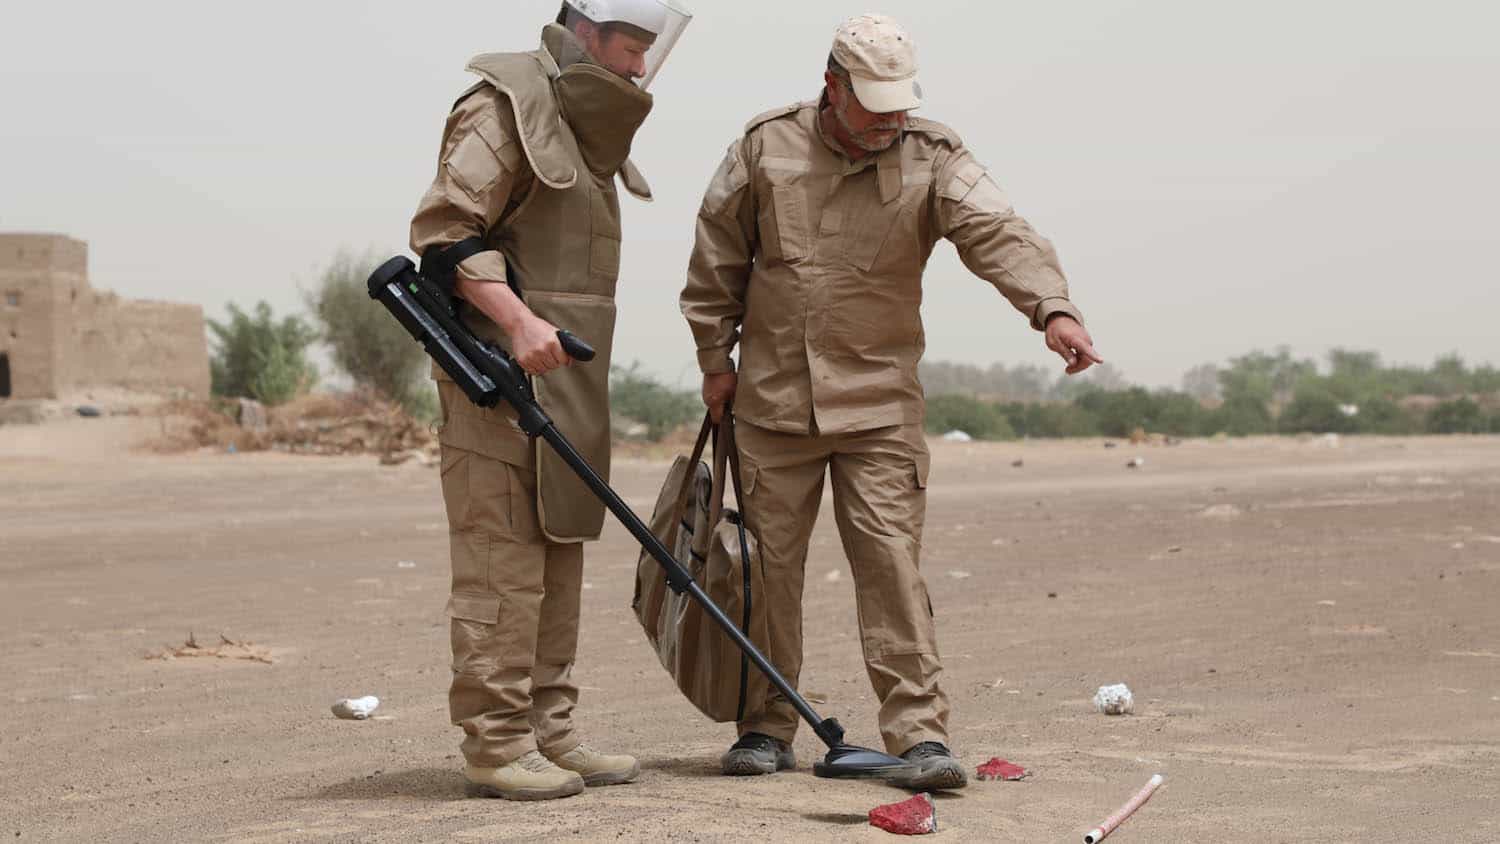 (Masam) team removing mines and unexploded ordnance